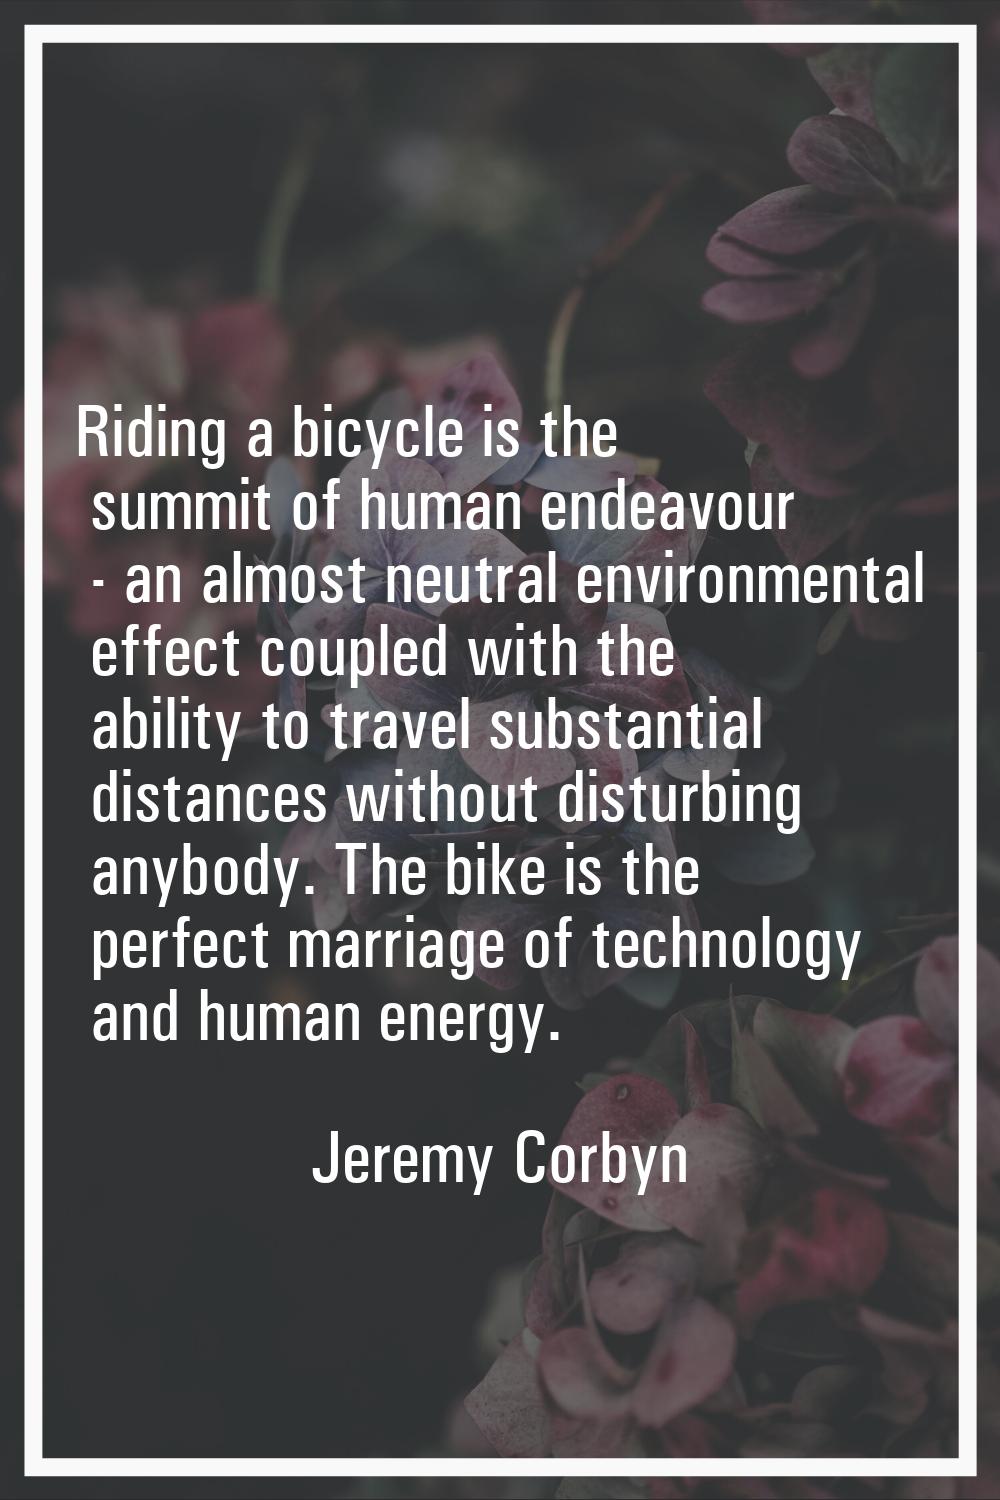 Riding a bicycle is the summit of human endeavour - an almost neutral environmental effect coupled 